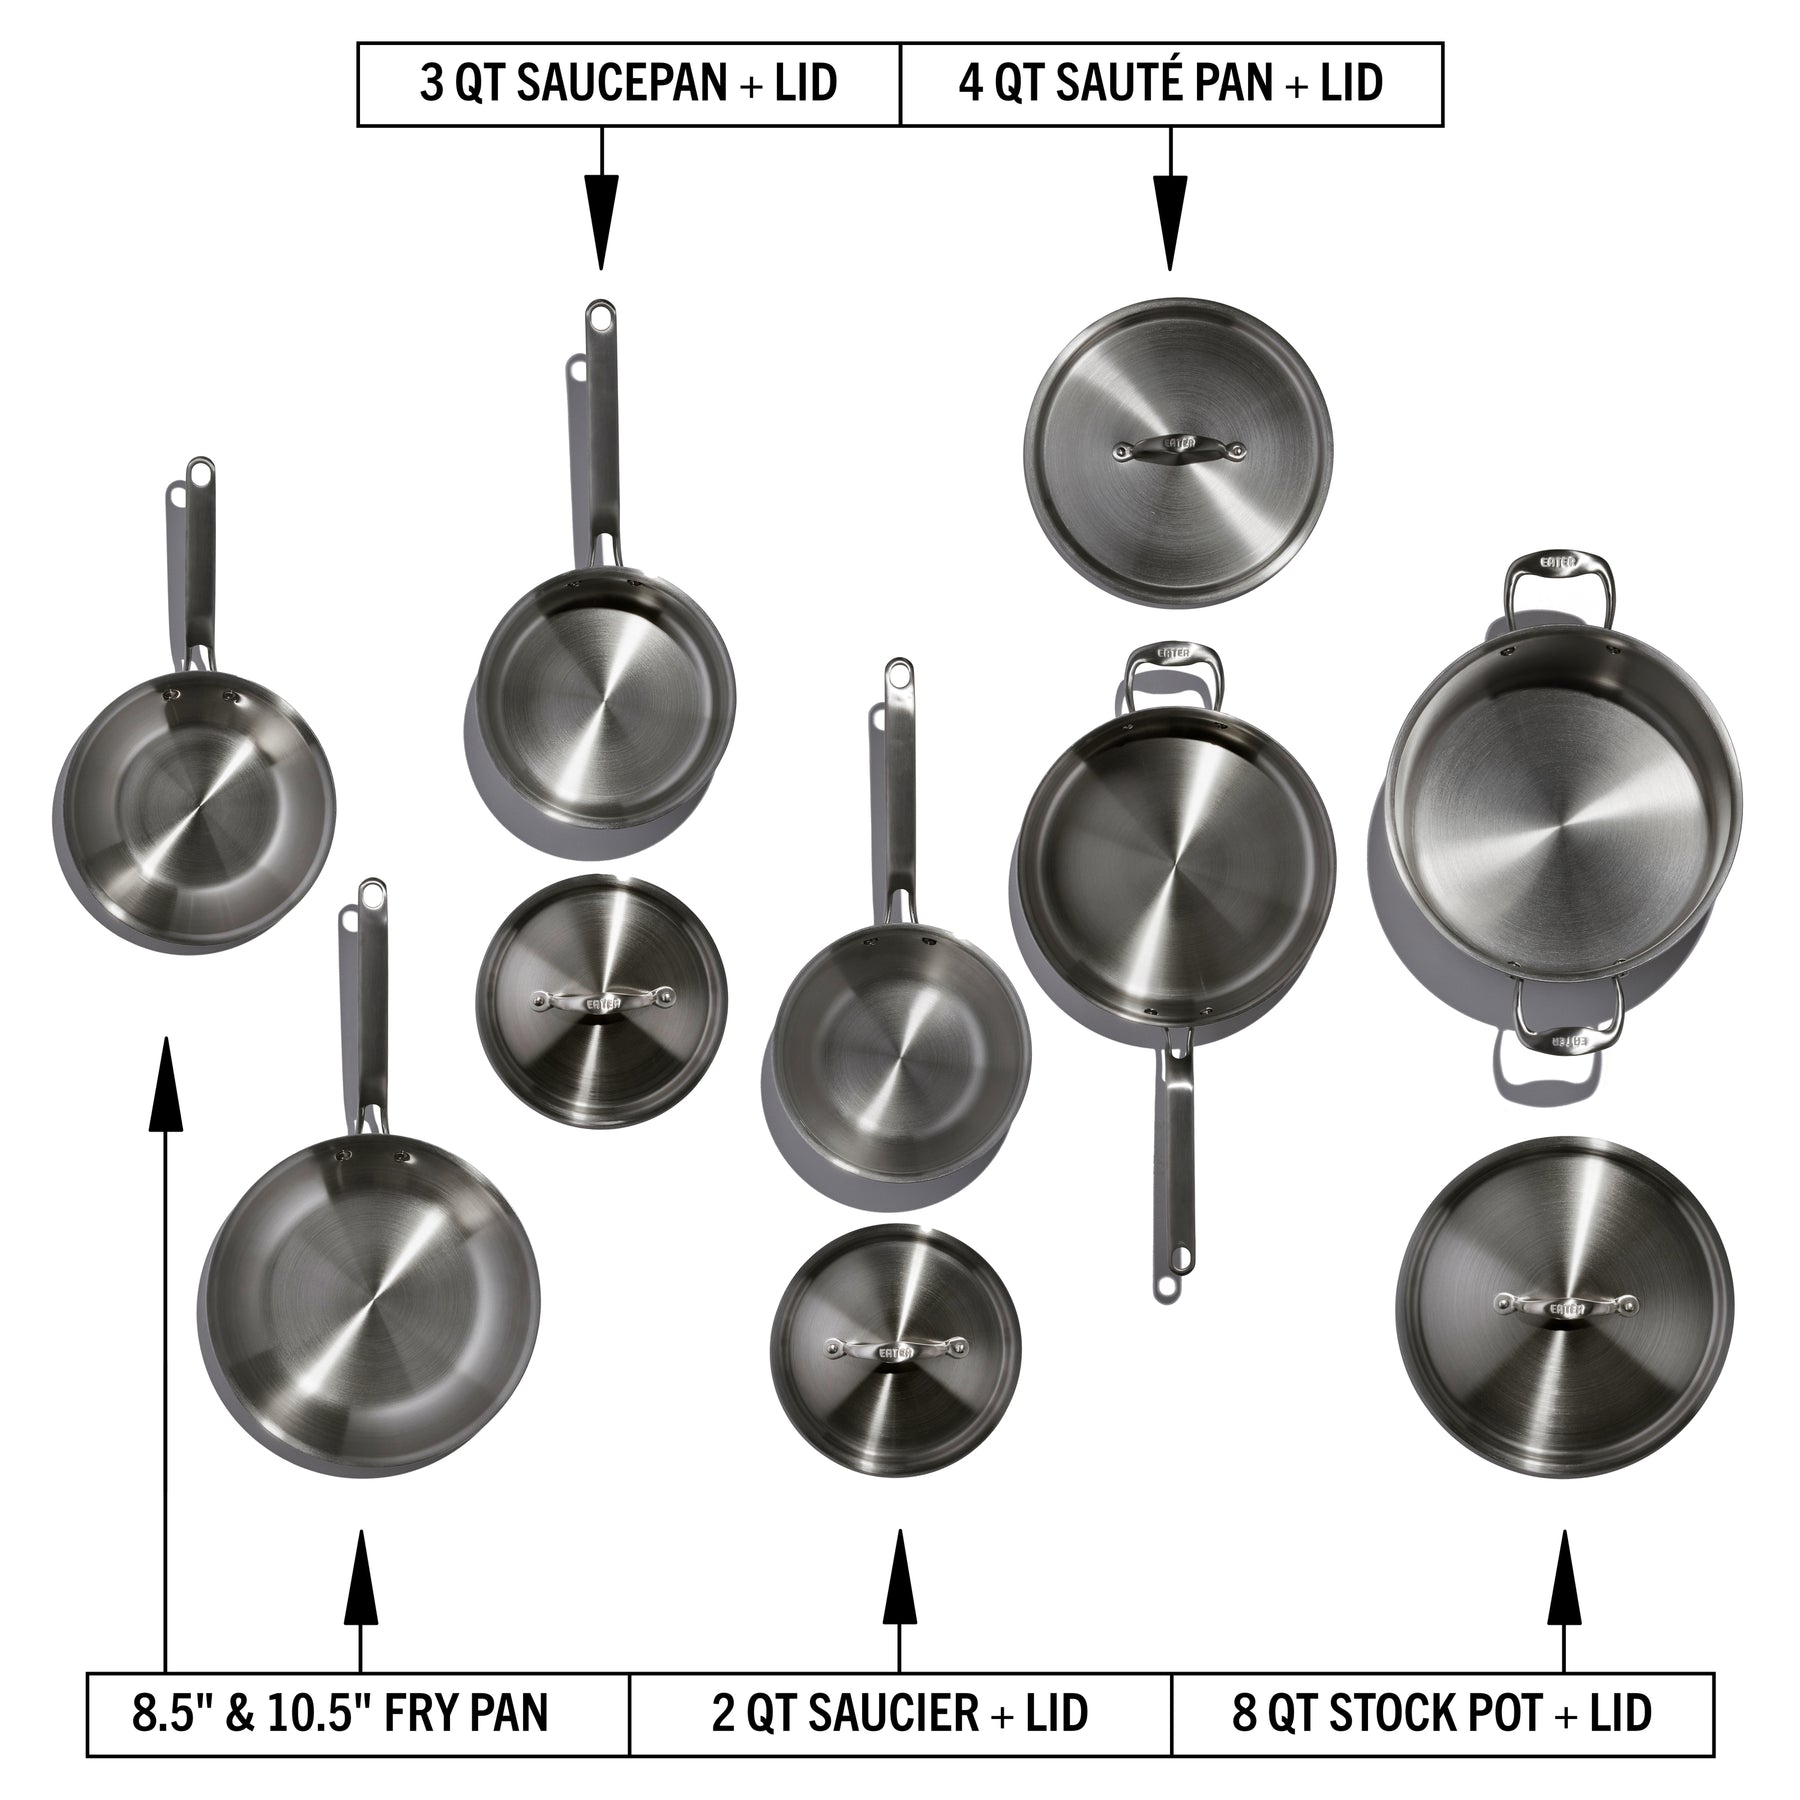 Demeyere Industry 5-Ply 10-pc Stainless Steel Cookware Set, 10-pc